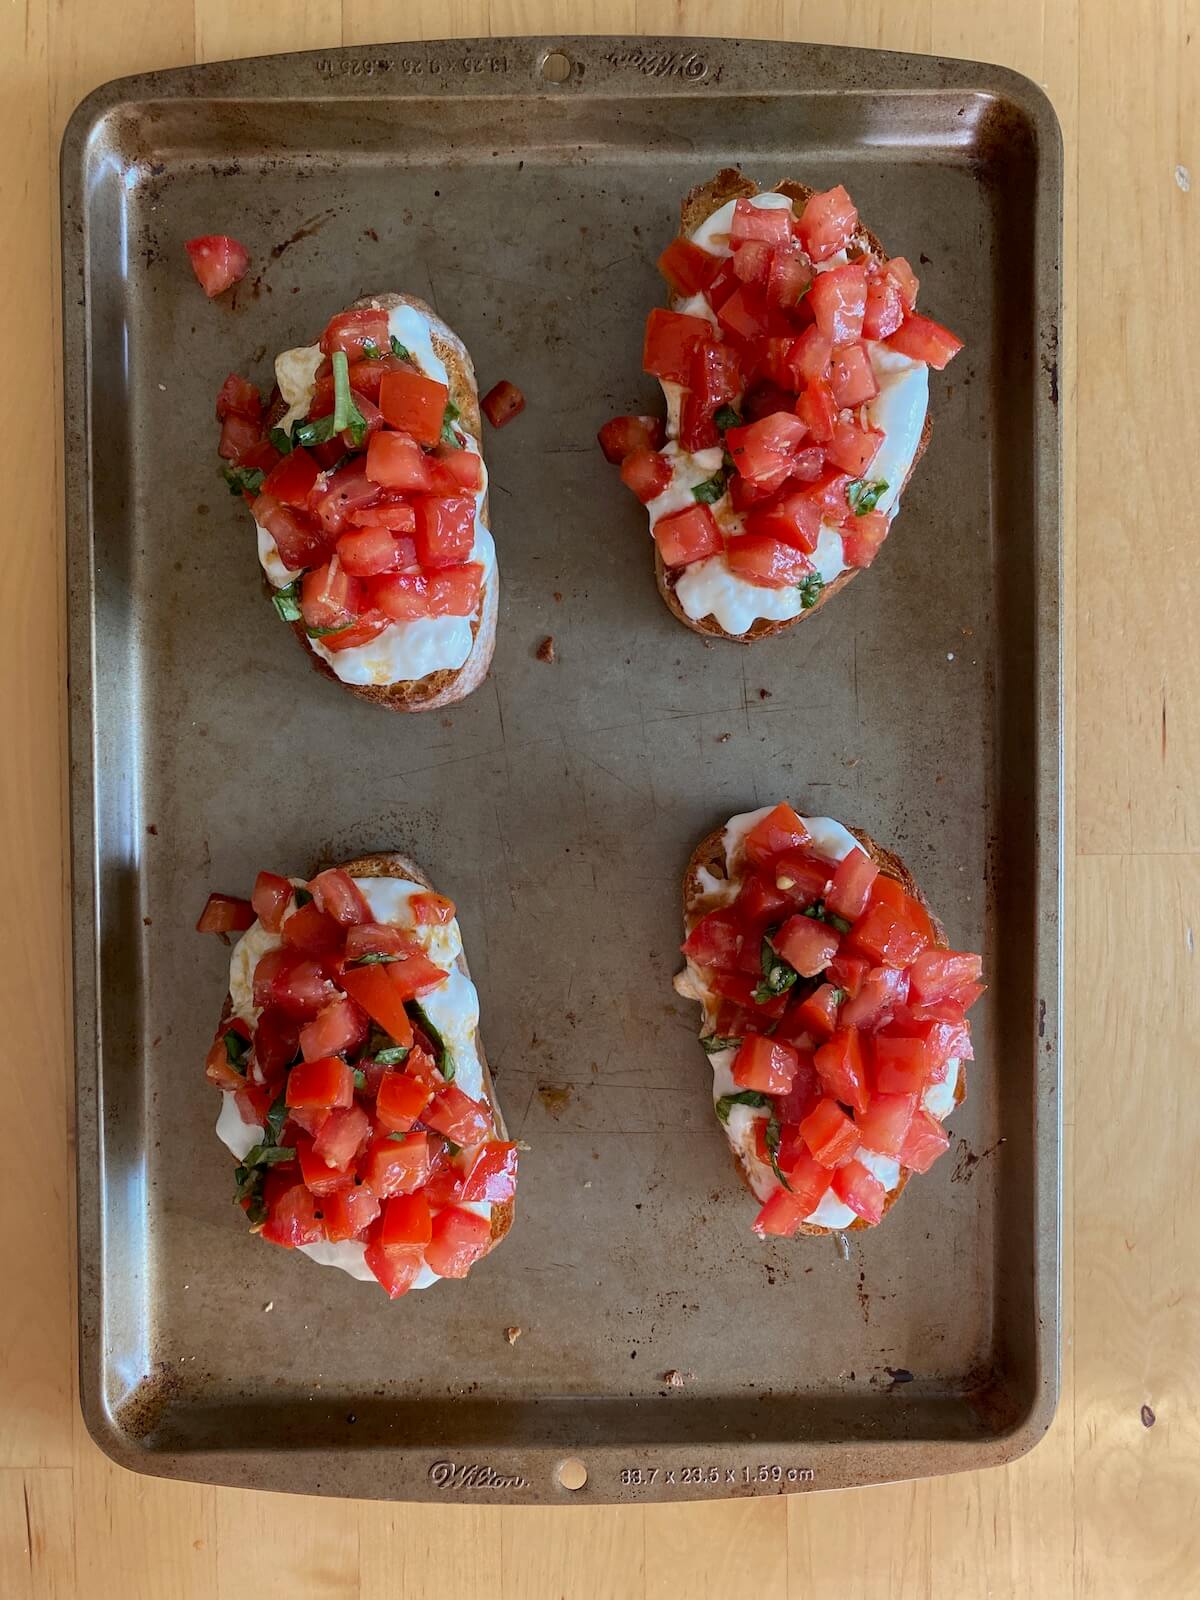 Four fully assembled bruschetta toasts on a rimmed baking sheet.